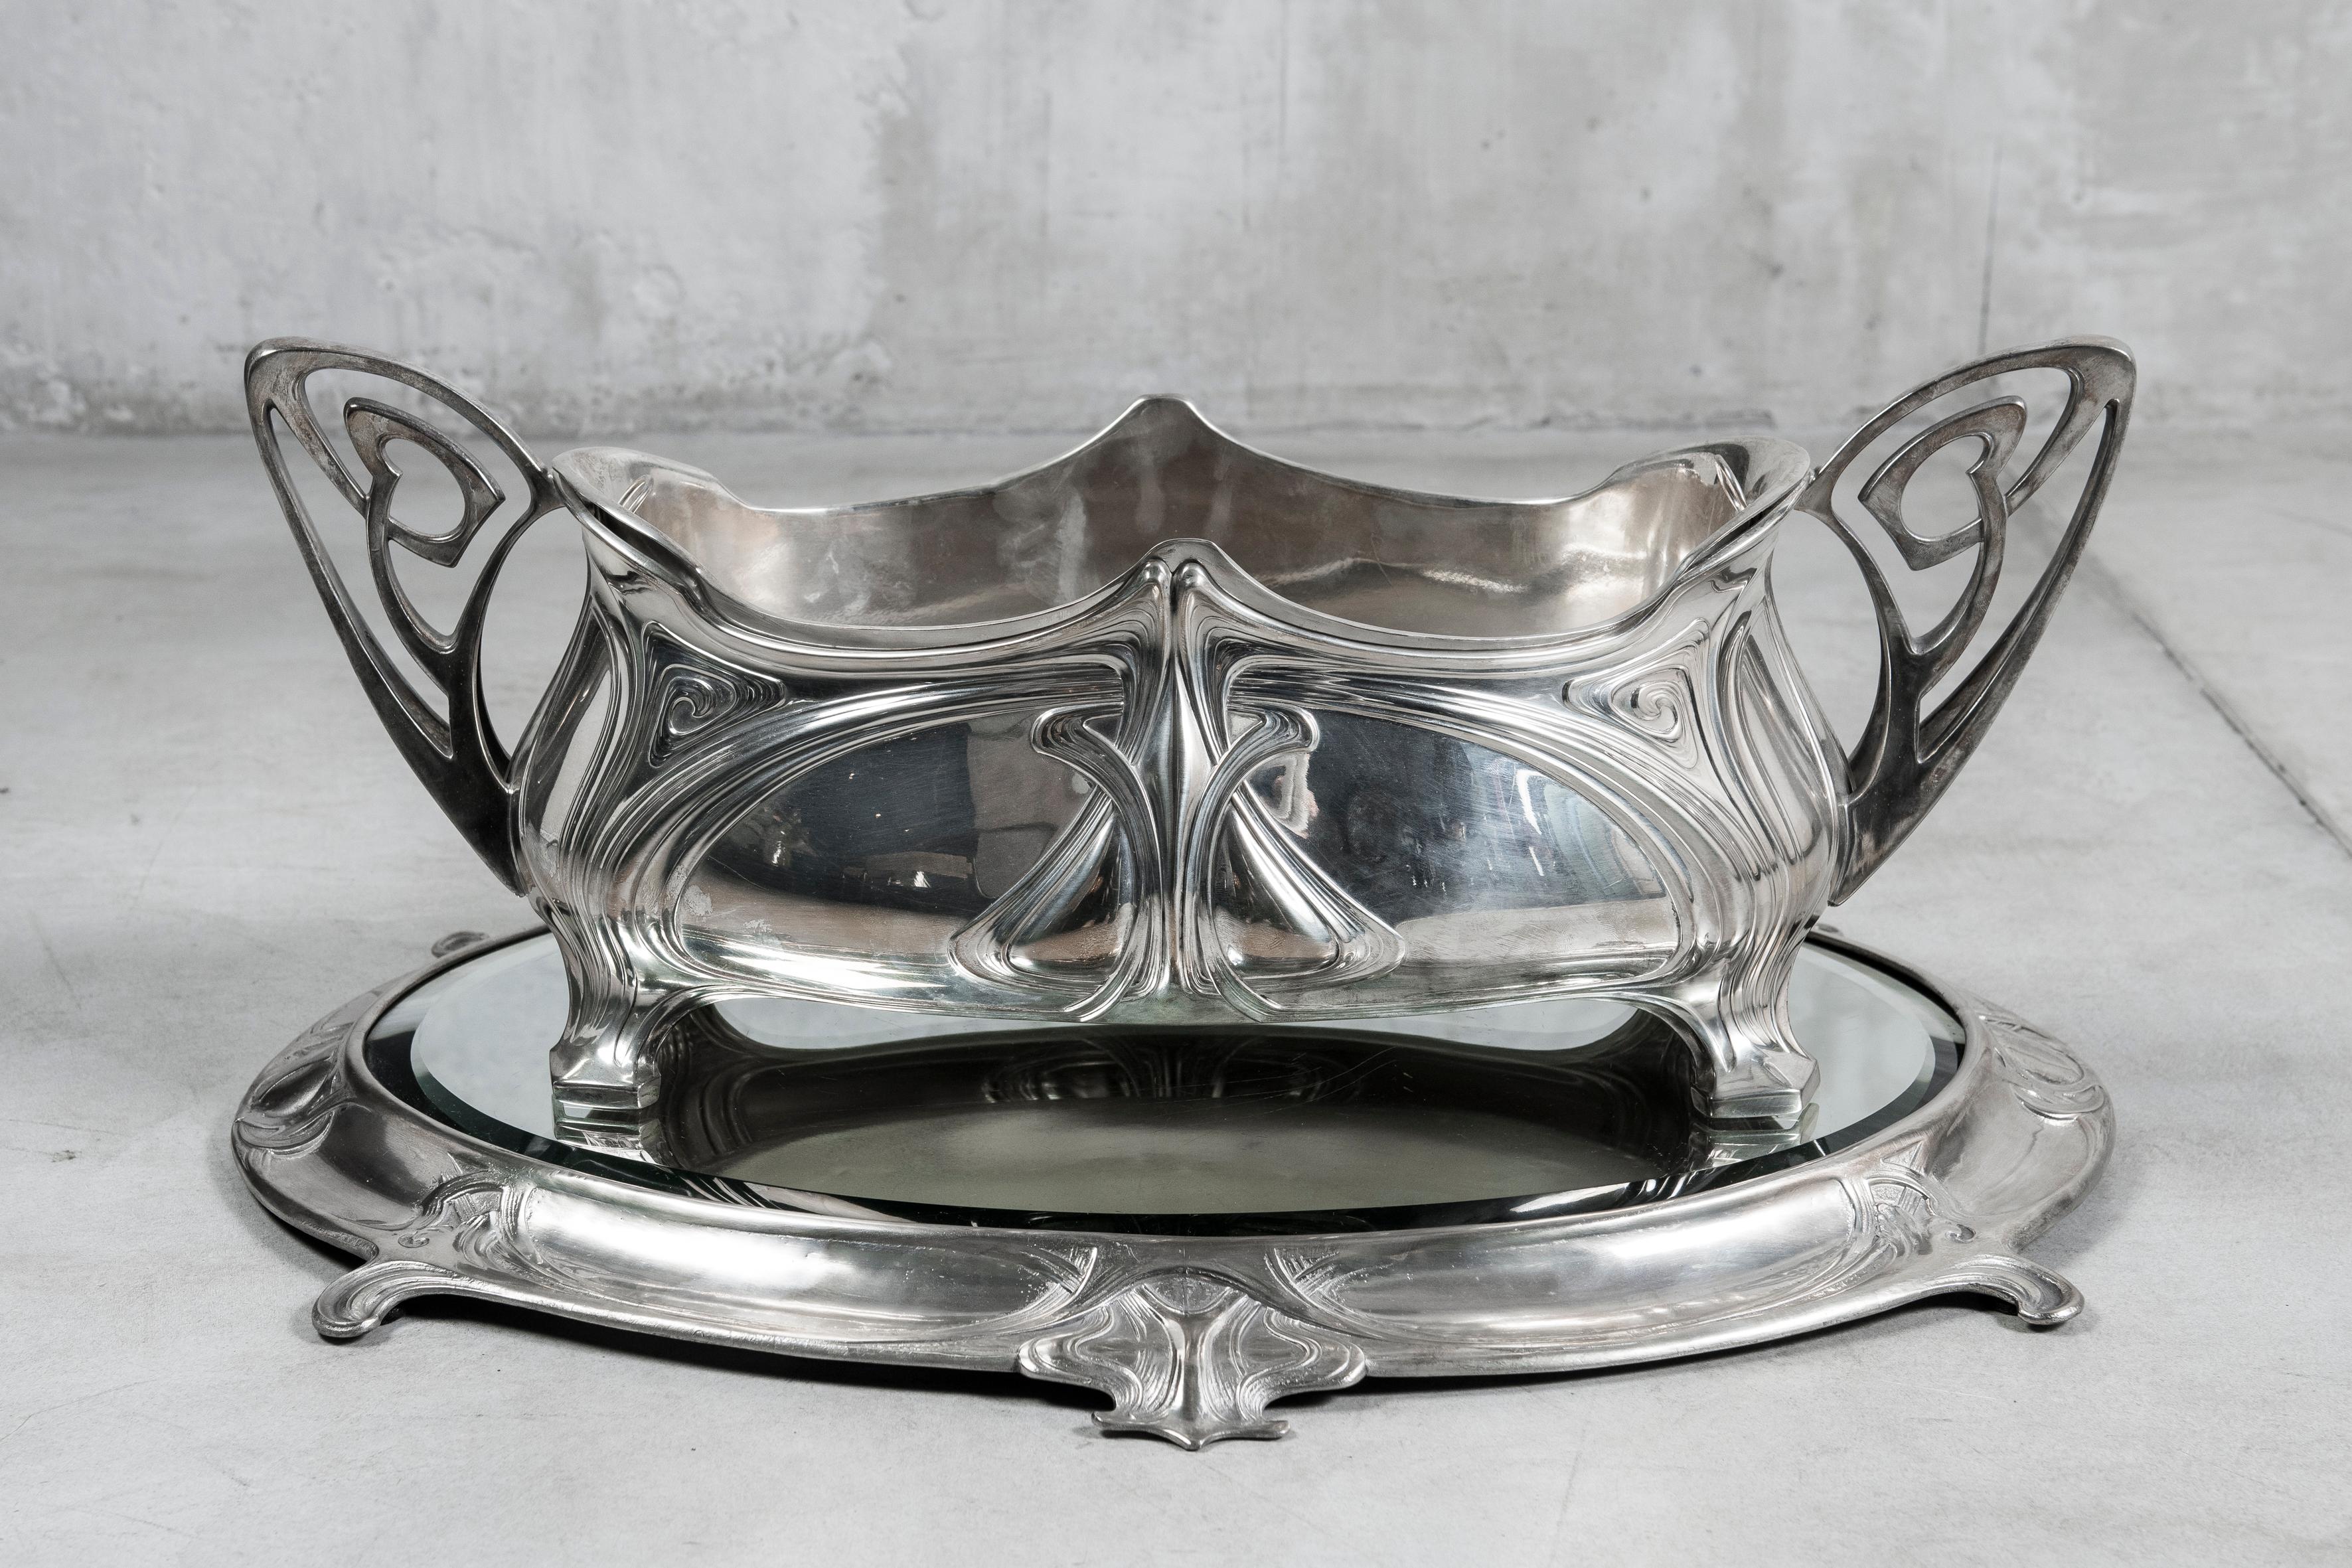 Pair of W.M.F. silver plate jardiniere with mirror plateau. Jugendstil style, Germany, circa 1900.